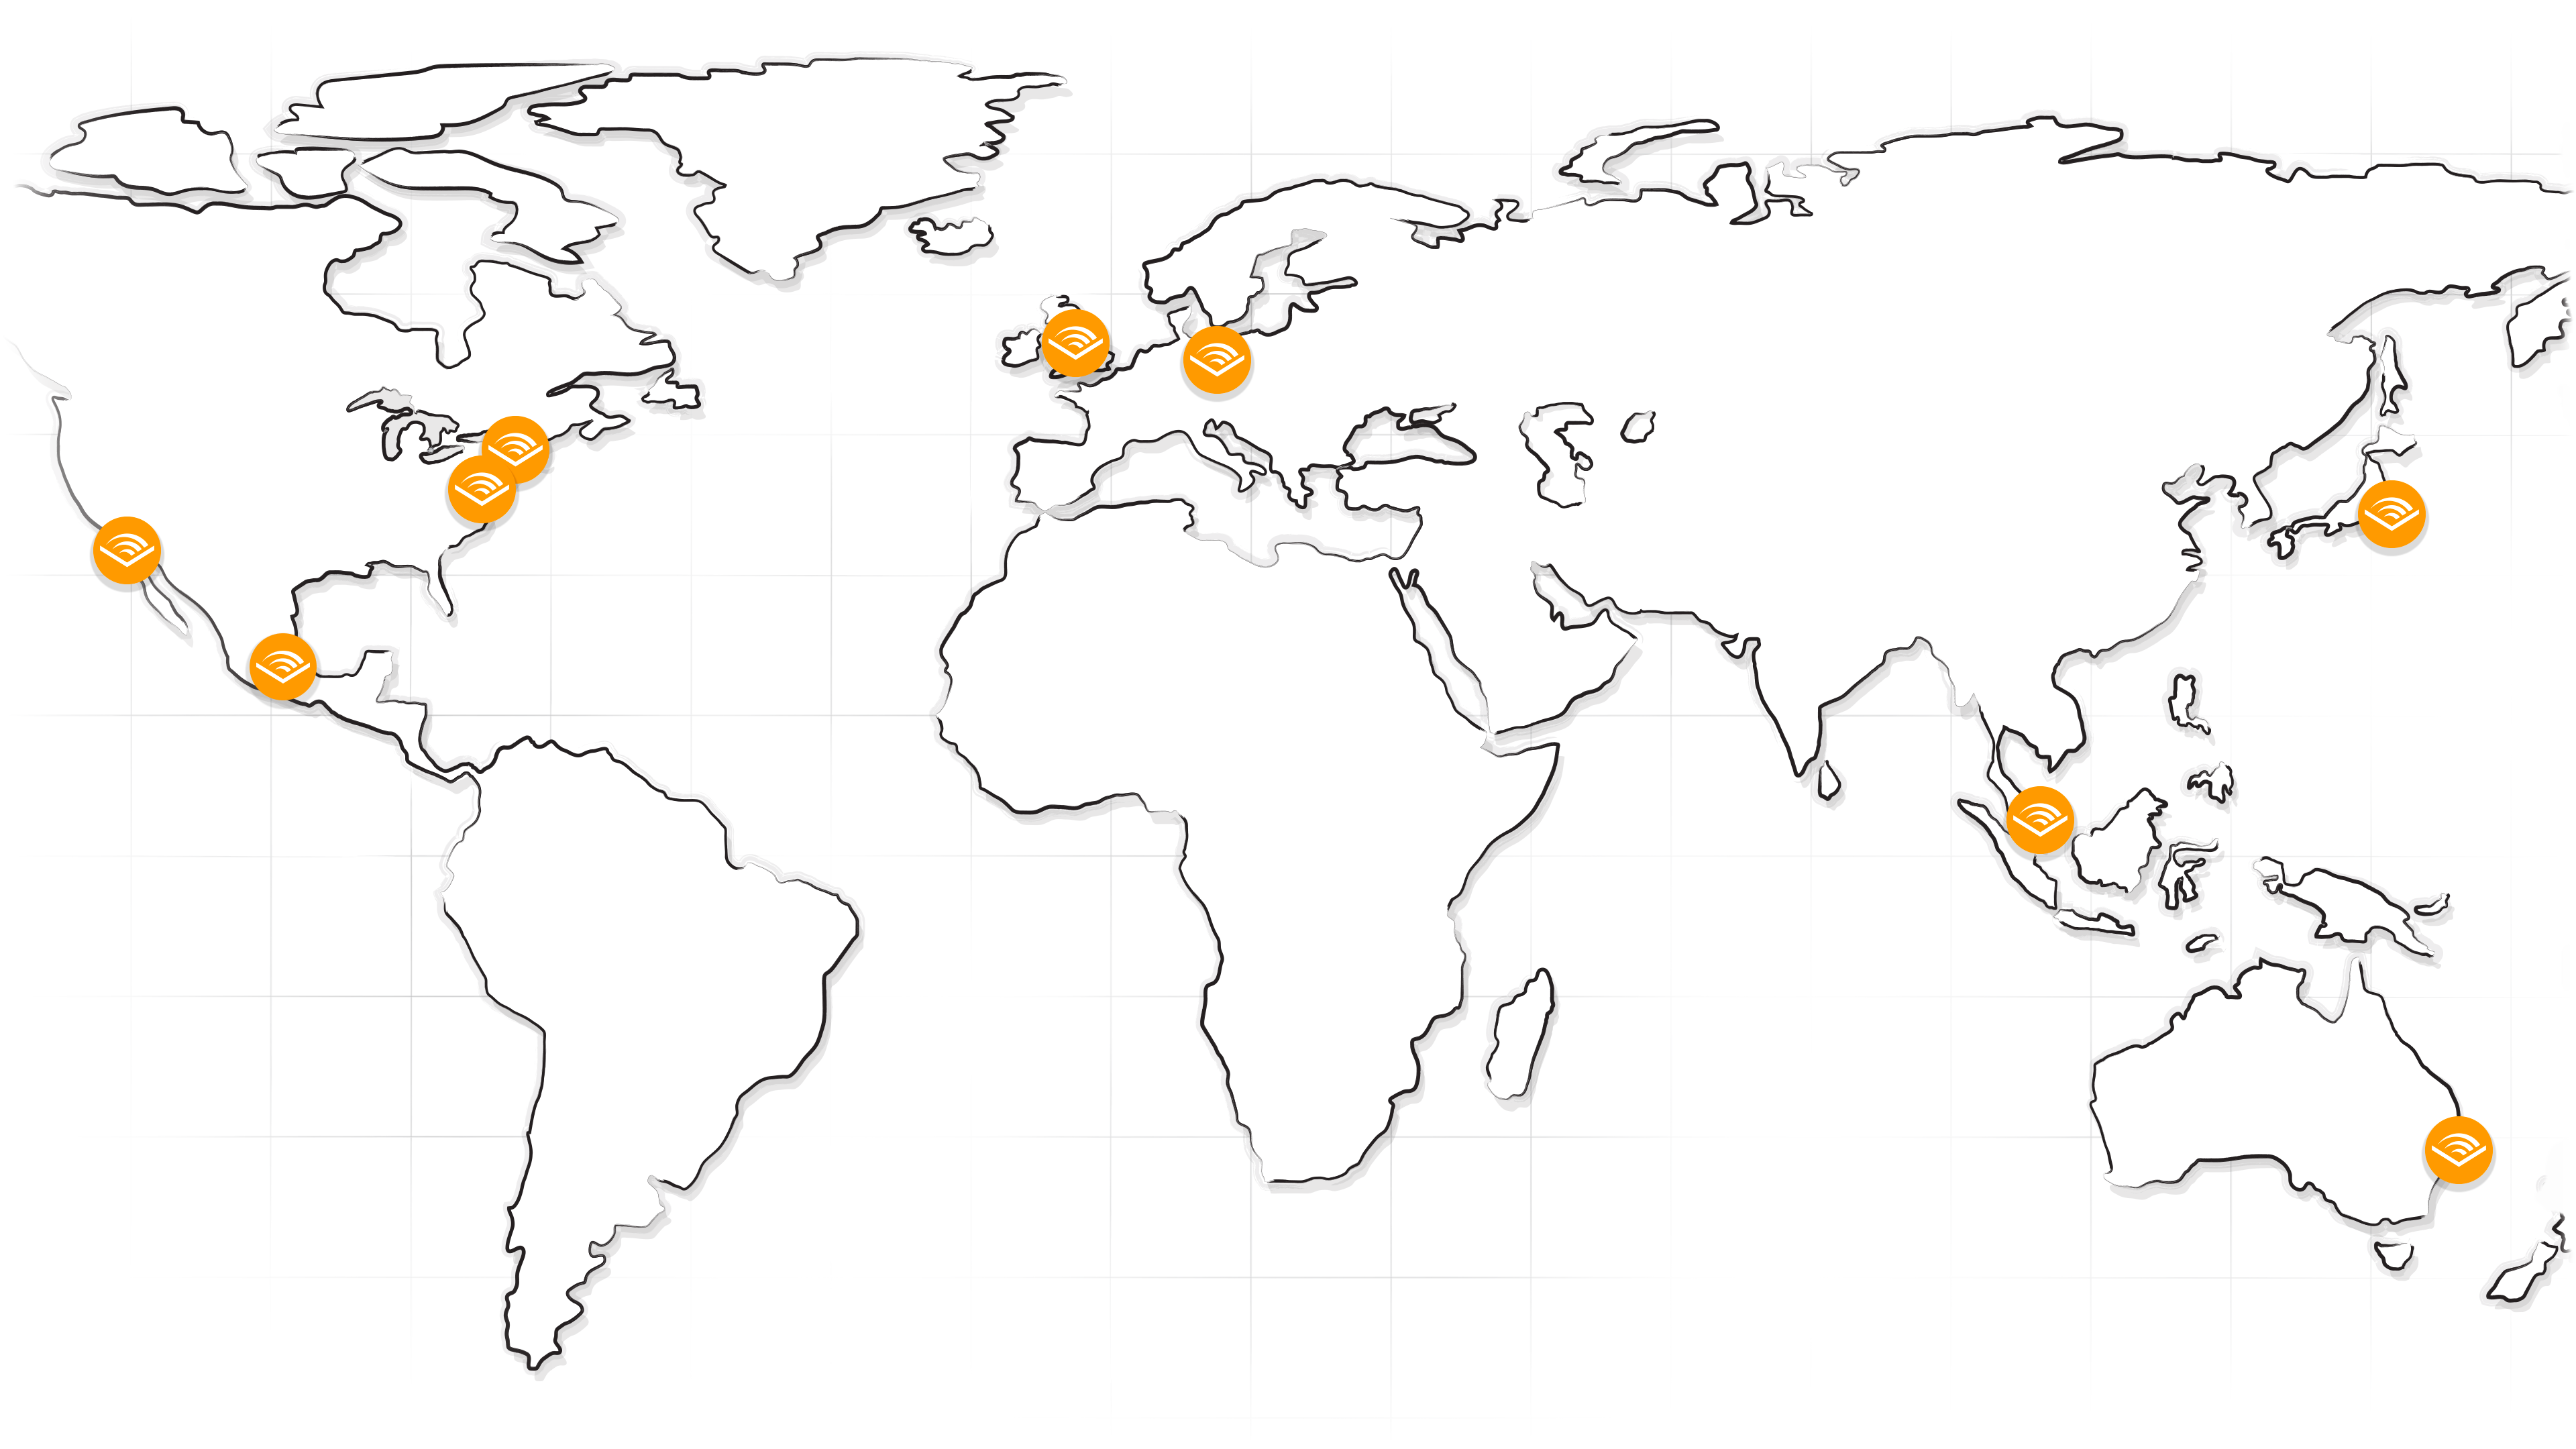 Picture of a map showing the locations of Audible's offices around the world.